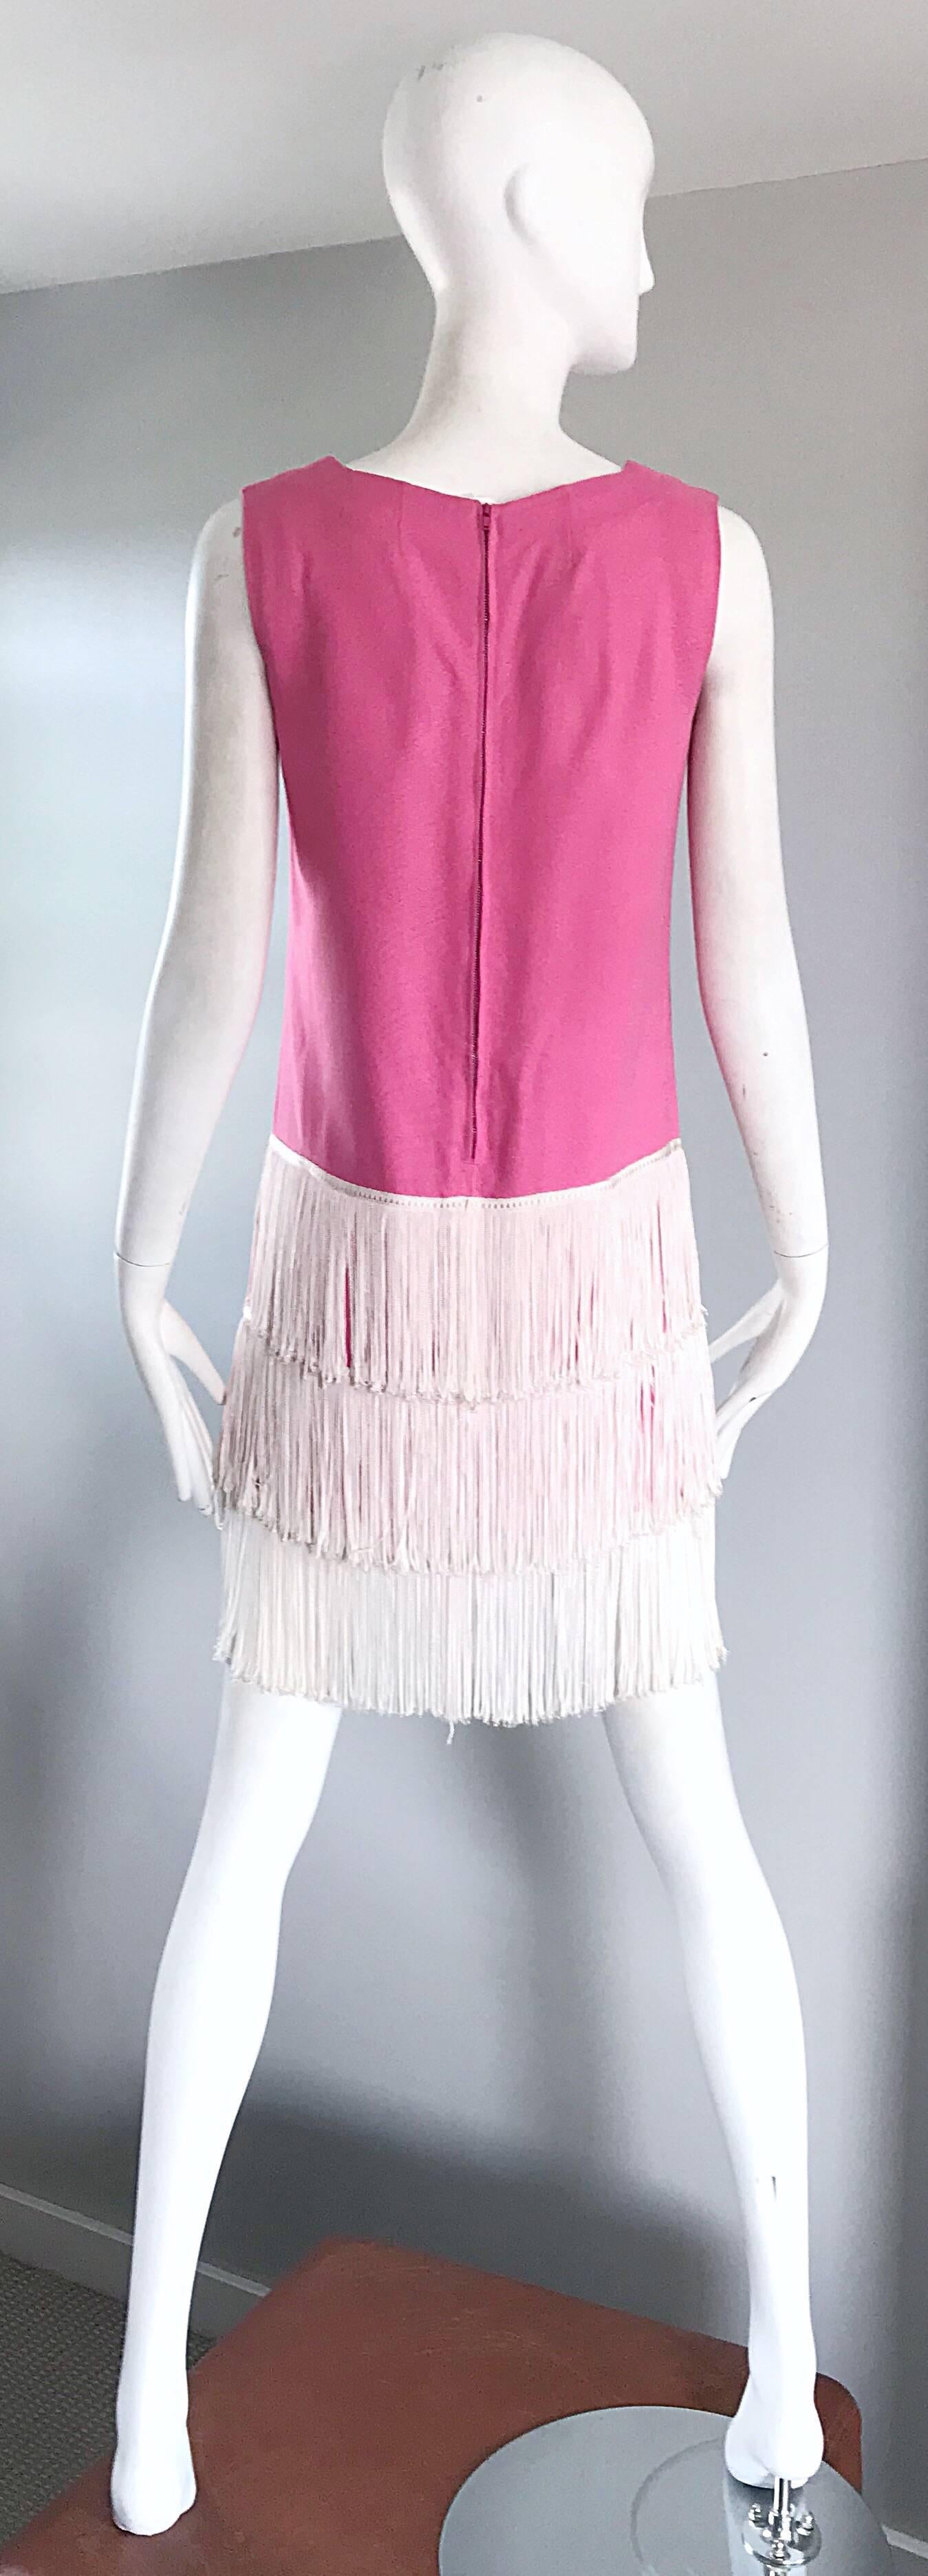 1960s does 1920s Bubblegum Pink + White Fringe Vintage 60s Flapper Shift Dress In Excellent Condition For Sale In San Diego, CA